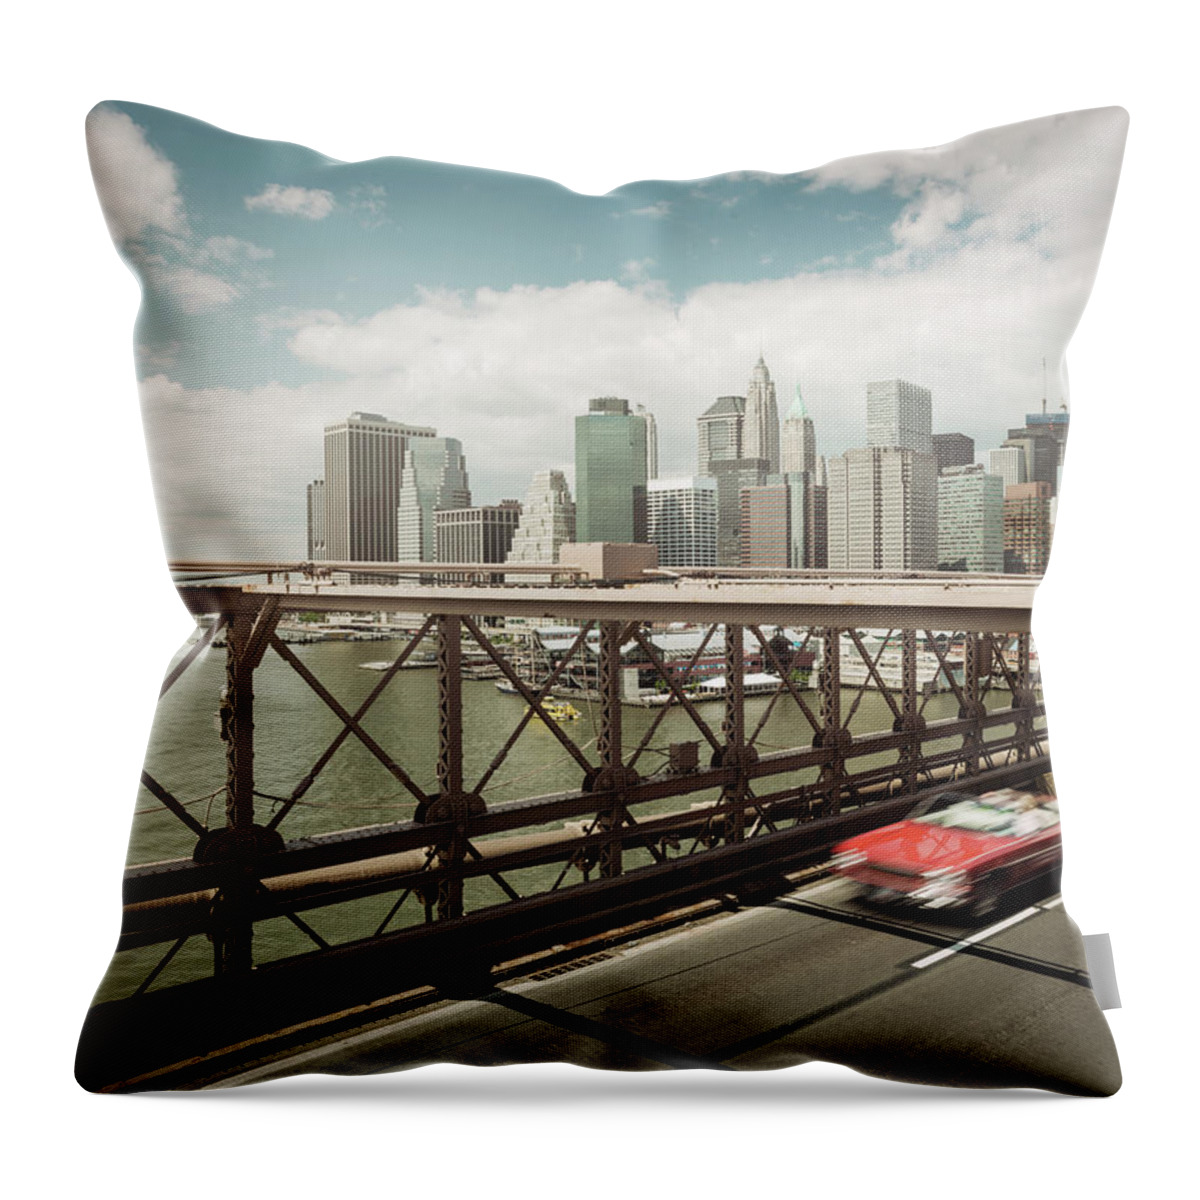 Downtown District Throw Pillow featuring the photograph Brooklyn Bridge View Of Lower Manhattan by Ppampicture